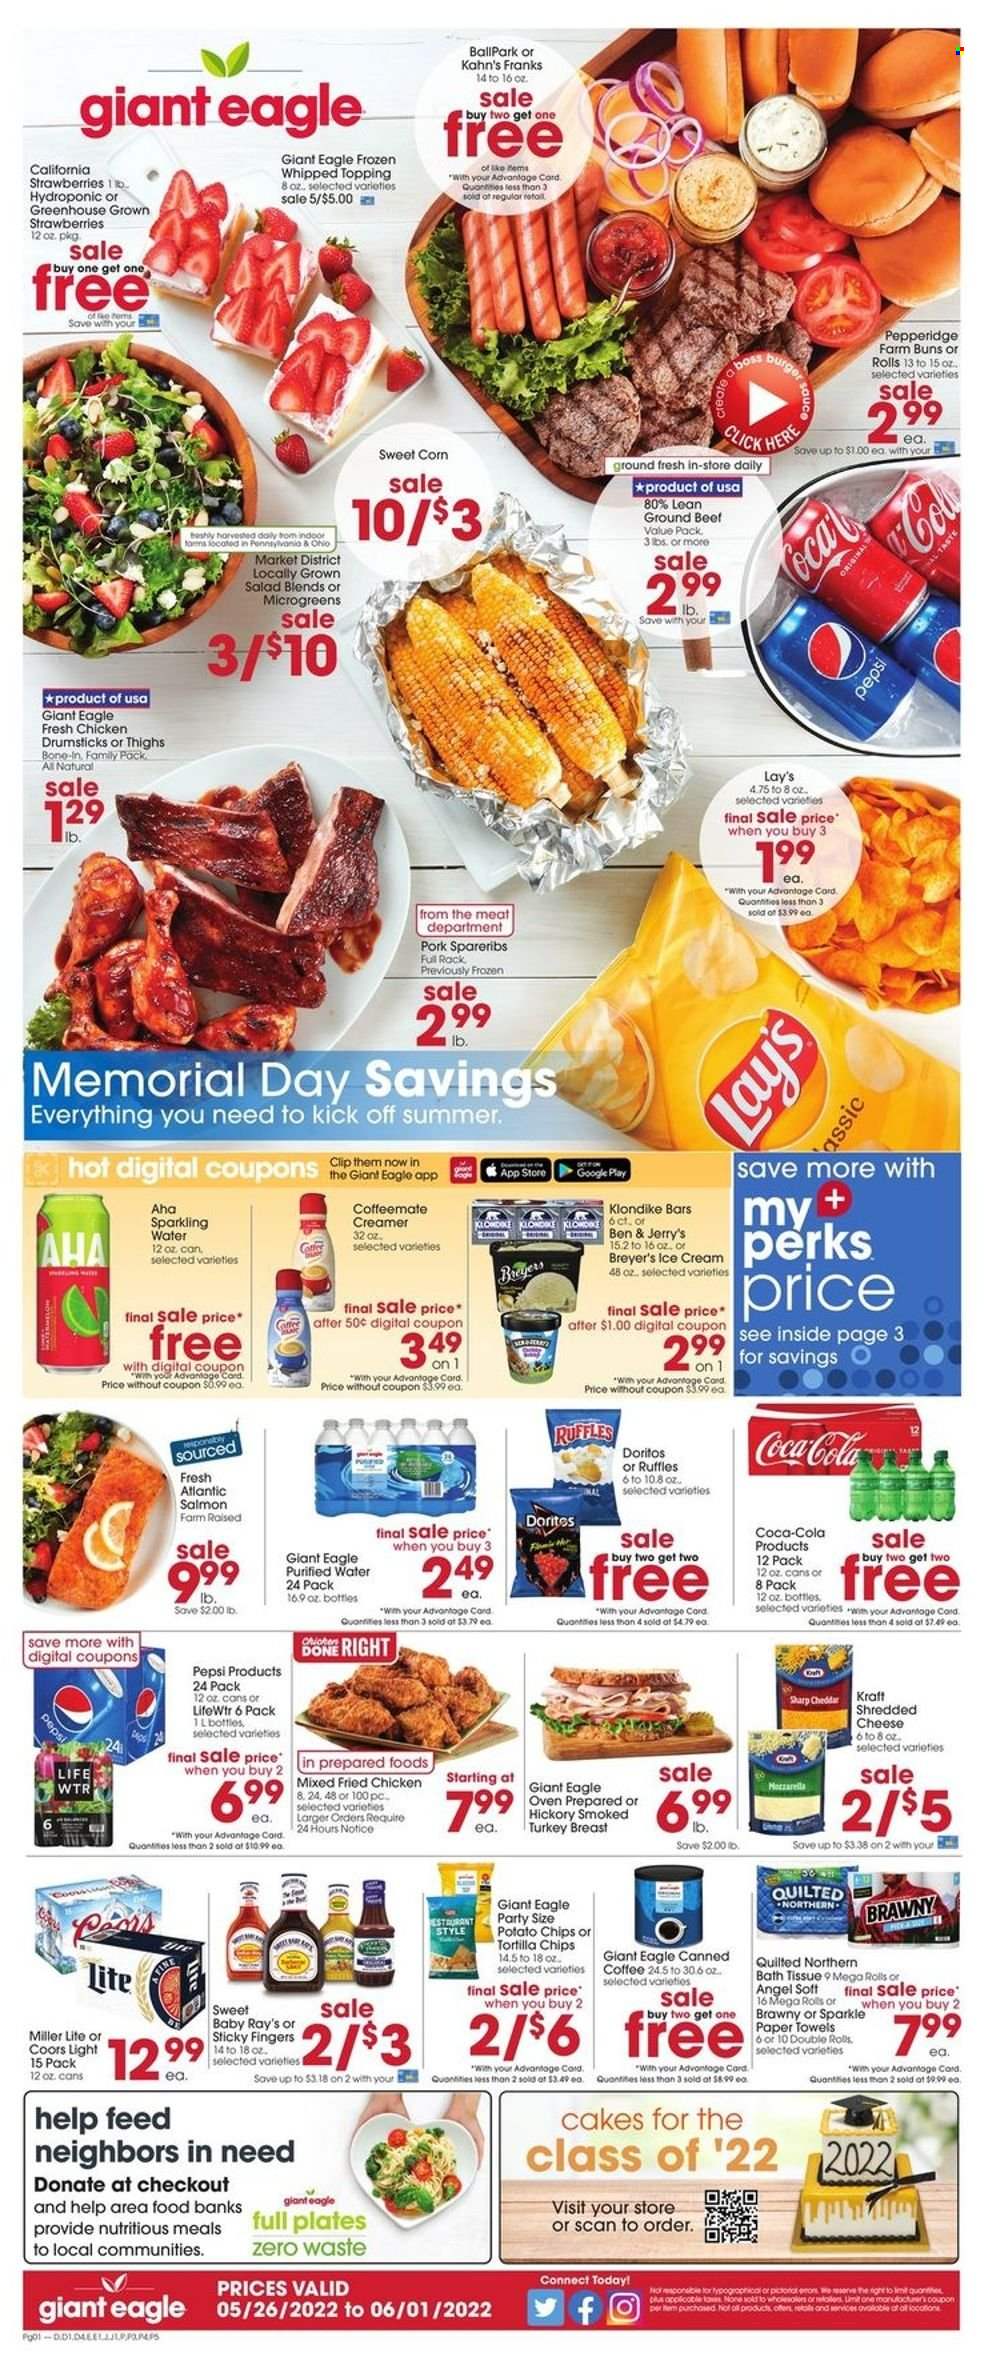 thumbnail - Giant Eagle Flyer - 05/26/2022 - 06/01/2022 - Sales products - cake, buns, salad, strawberries, salmon, hamburger, fried chicken, Kraft®, mozzarella, shredded cheese, creamer, ice cream, Ben & Jerry's, Doritos, tortilla chips, potato chips, Lay’s, Ruffles, topping, Coca-Cola, Pepsi, sparkling water, purified water, Lifewtr, coffee, beer, chicken drumsticks, beef meat, ground beef, pork spare ribs, bath tissue, Quilted Northern, kitchen towels, paper towels, plate, Miller Lite, Coors. Page 1.